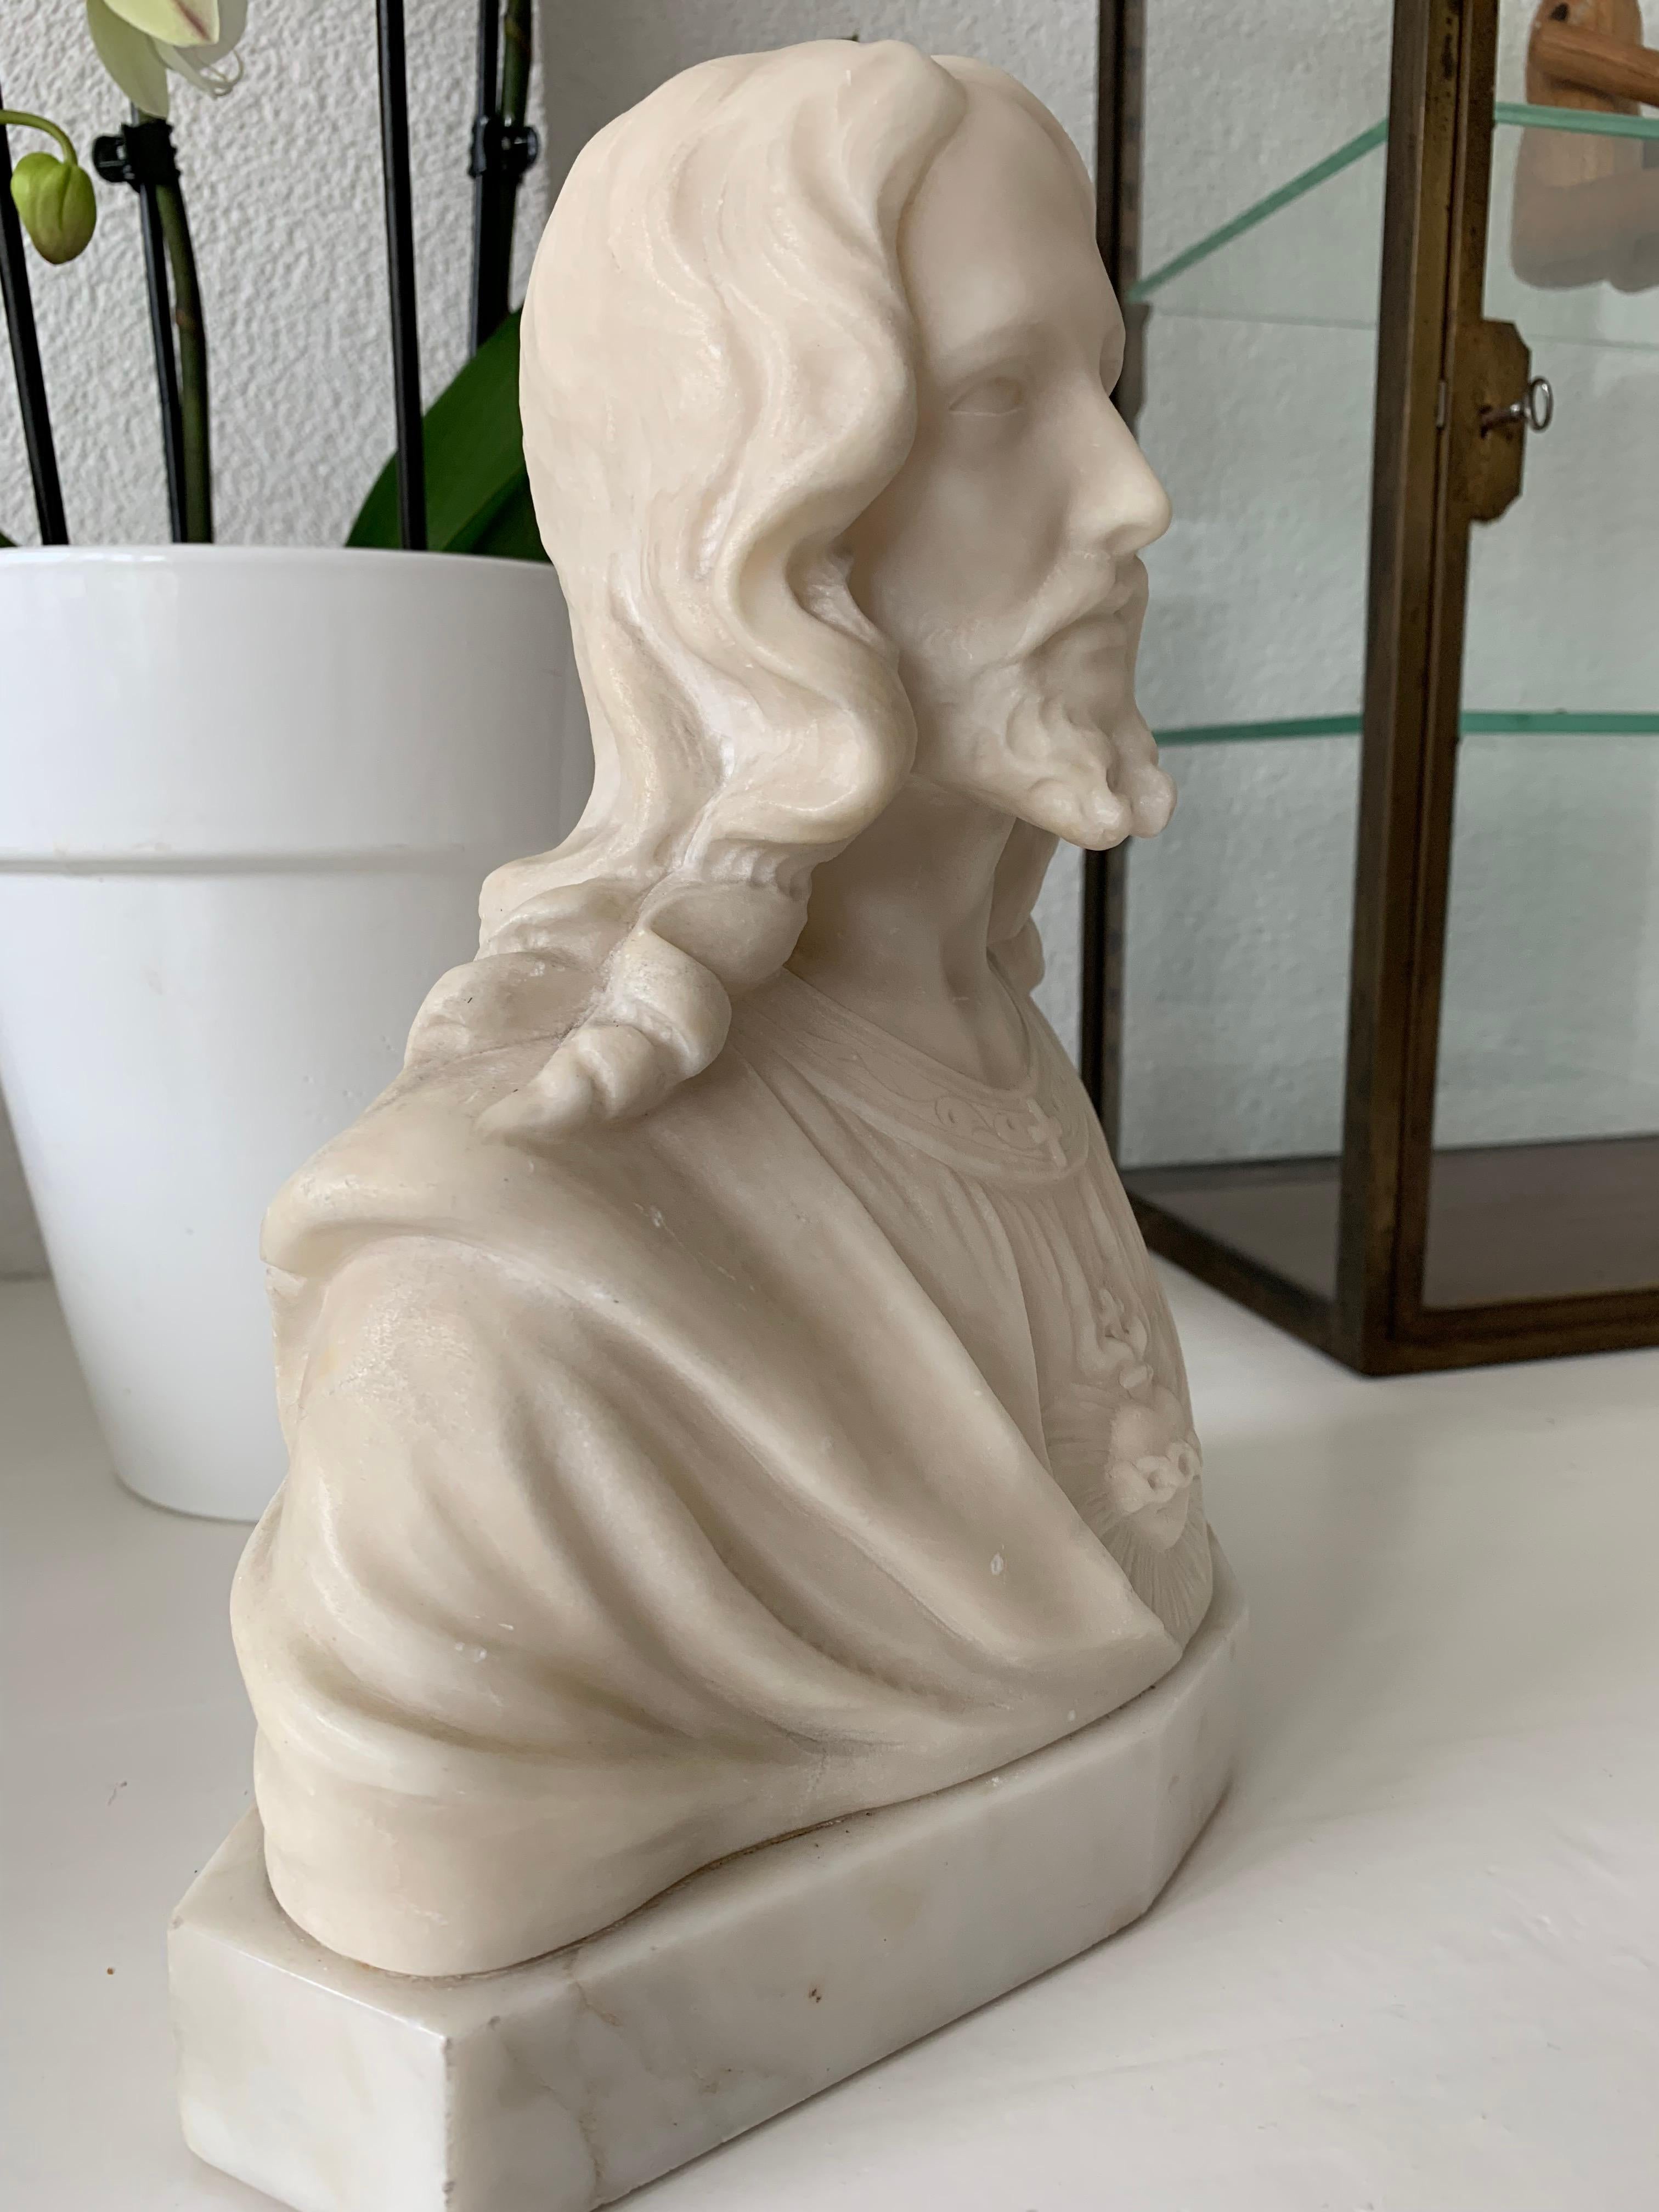 Wonderful antique sculpture of our Lord Jesus.

This gorgeous and practical size sculpture is signed on the back by the artist, but unfortunately we can't 'decipher' his/her name. Thanks to its practical size this work of religious art is ideal for